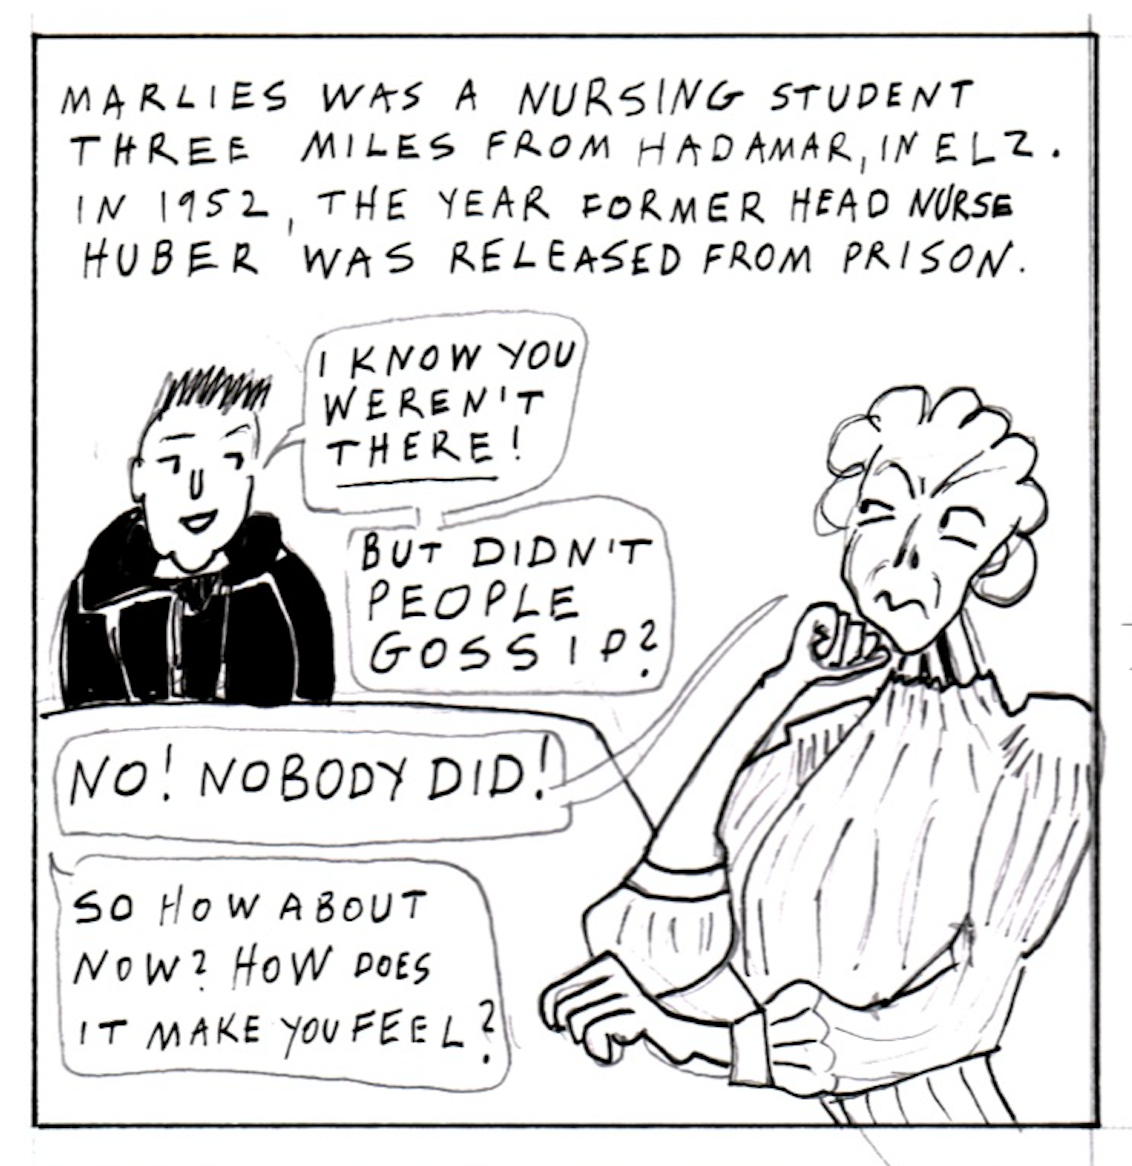 â€œMarlies was a nursing student three miles from Hadamar, in Elz. In 1952, the year former head nurse Huber was released from prison.â€ Michaela says, â€œI know you werenâ€™t THERE! But didnâ€™t people gossip?â€ Marlies replies, upset, â€œNo! Nobody did!â€ Michaela pushes, â€œSo how about now? How does it make you feel?â€